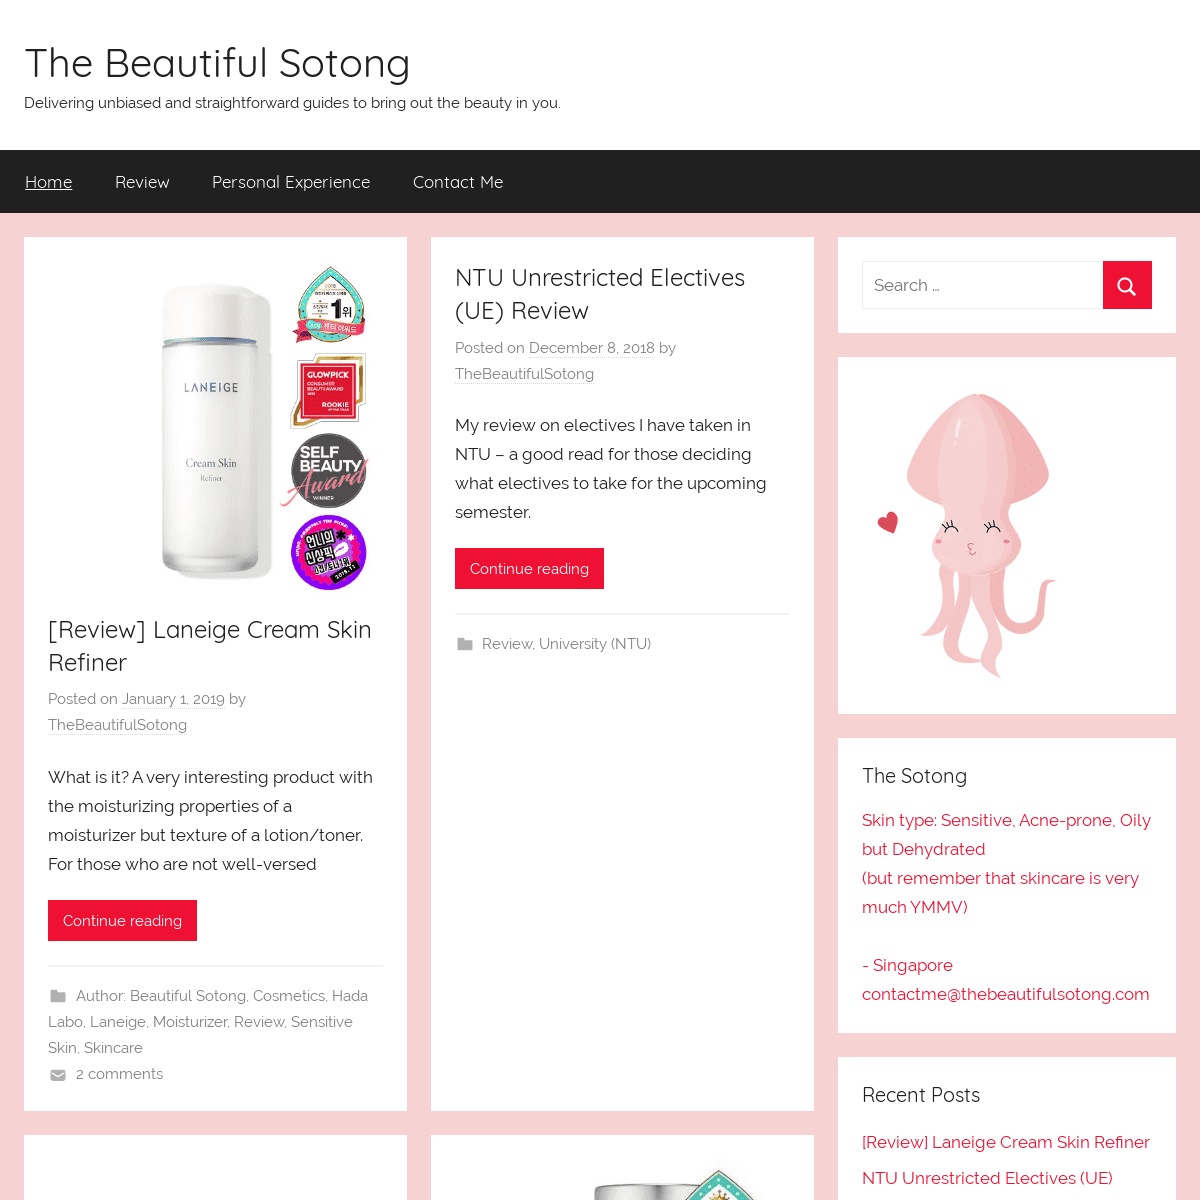 A complete backup of thebeautifulsotong.com